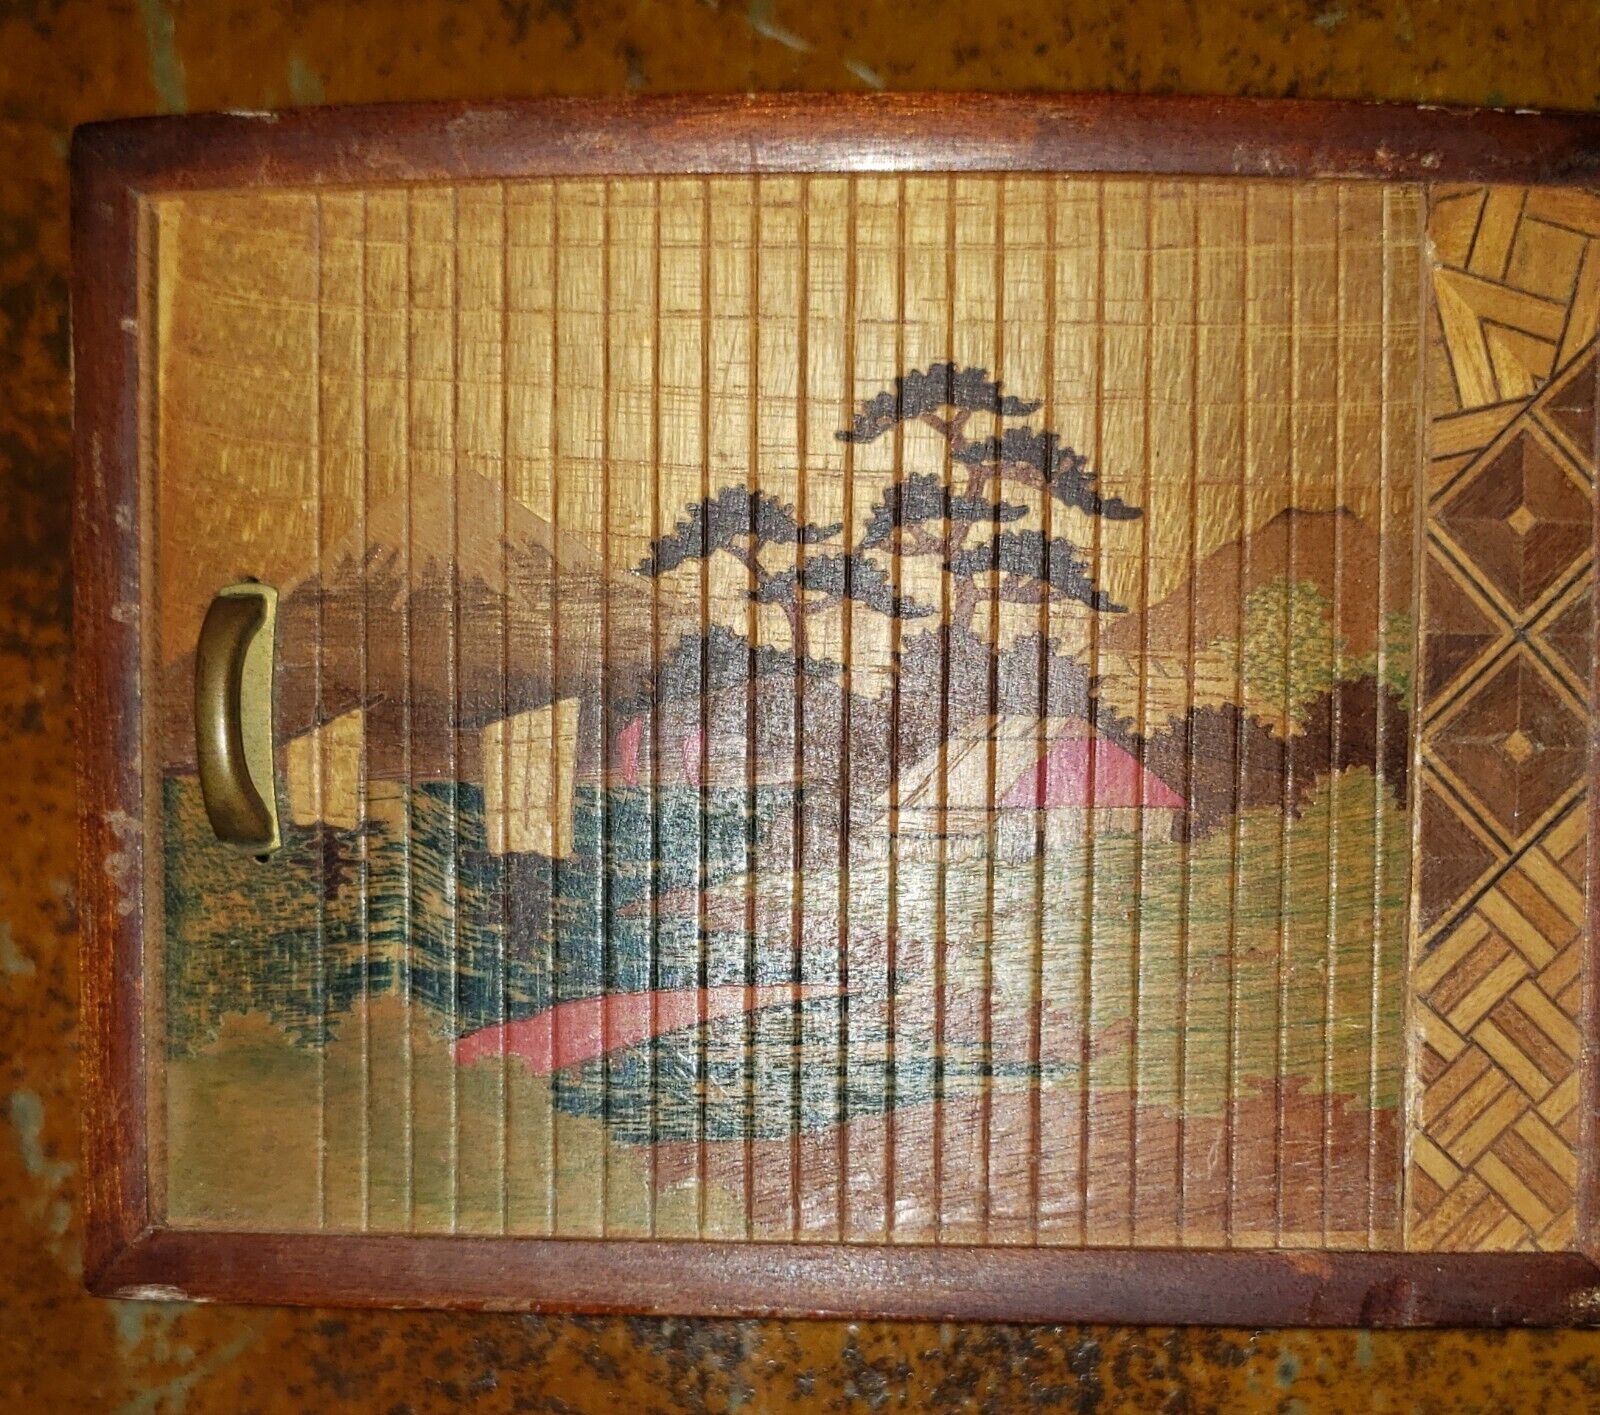 Rare Vintage Japanese Mechanical Cigarette Dispenser Box Wood Marquetry Clever